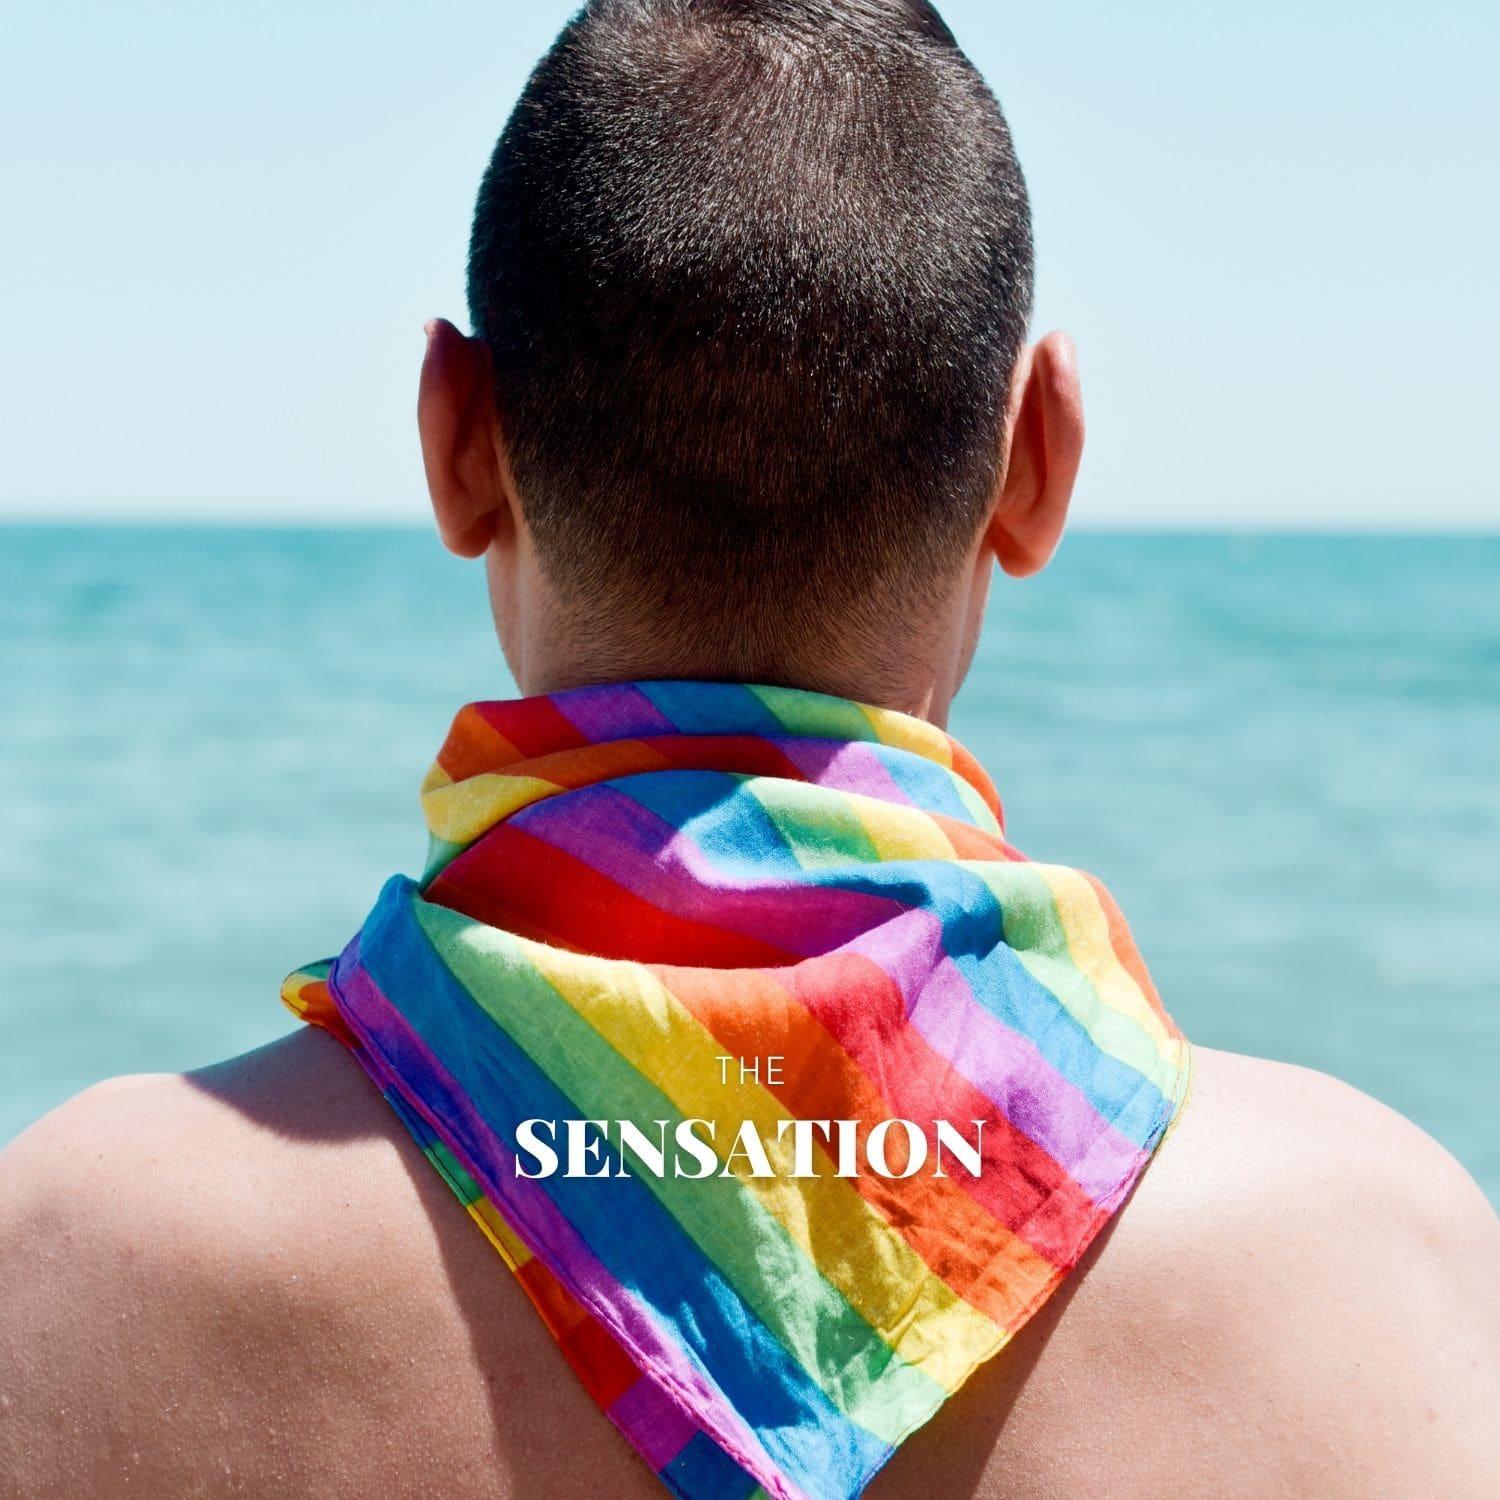 Engaging image of a young male at the seaside, stylishly wearing a TOMSCOUT LGBT rainbow pride bandana tied at the back. Perfect for the LGBT community in Singapore seeking a versatile, vibrant accessory that symbolizes freedom and pride.